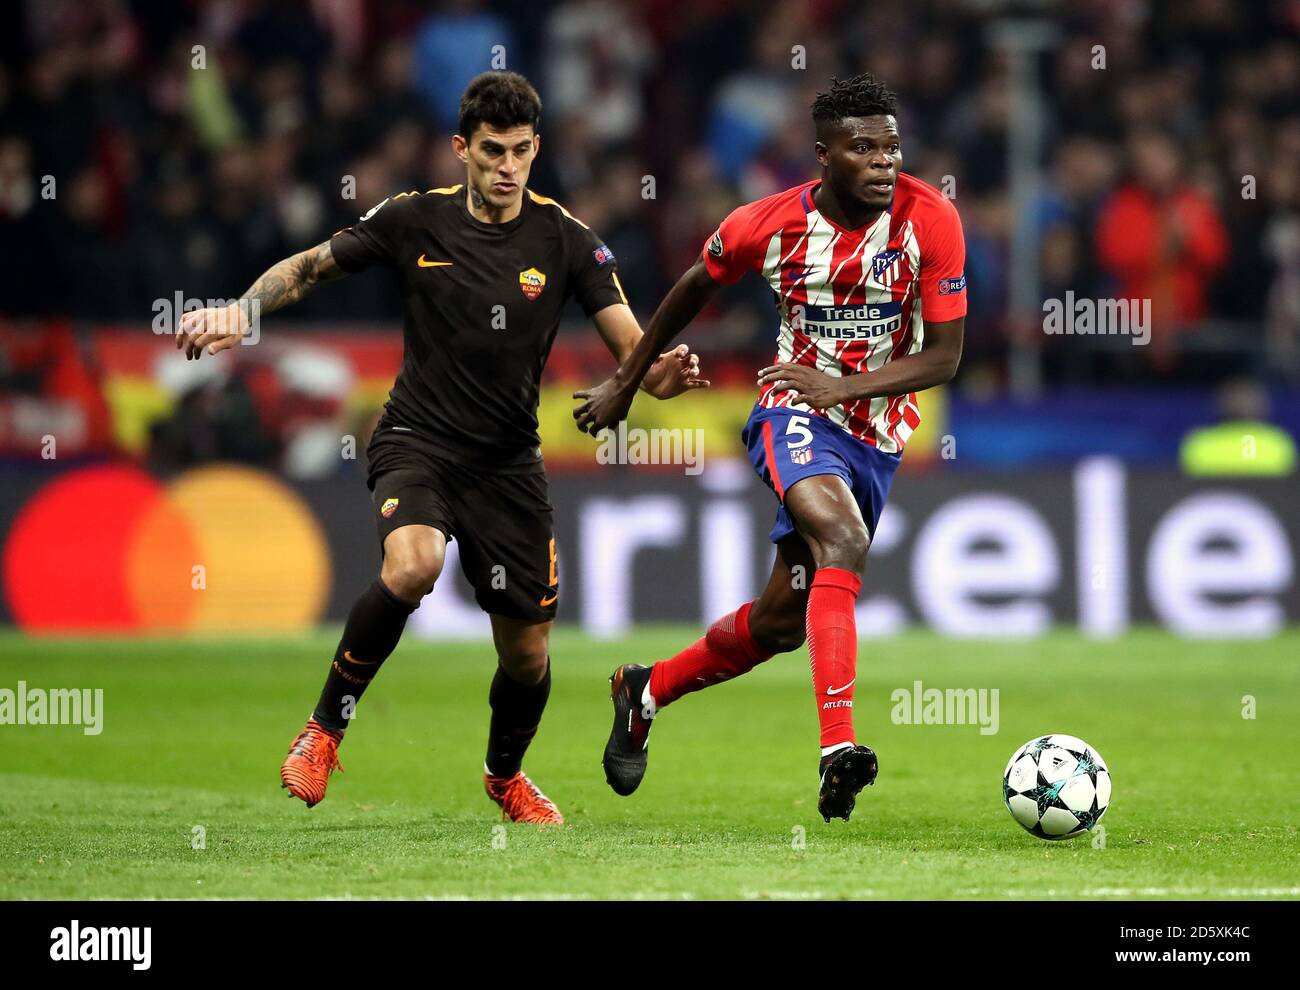 AS Roma's Diego Perotti (left) and Atletico Madrid's Thomas (right) battle for the ball  Stock Photo